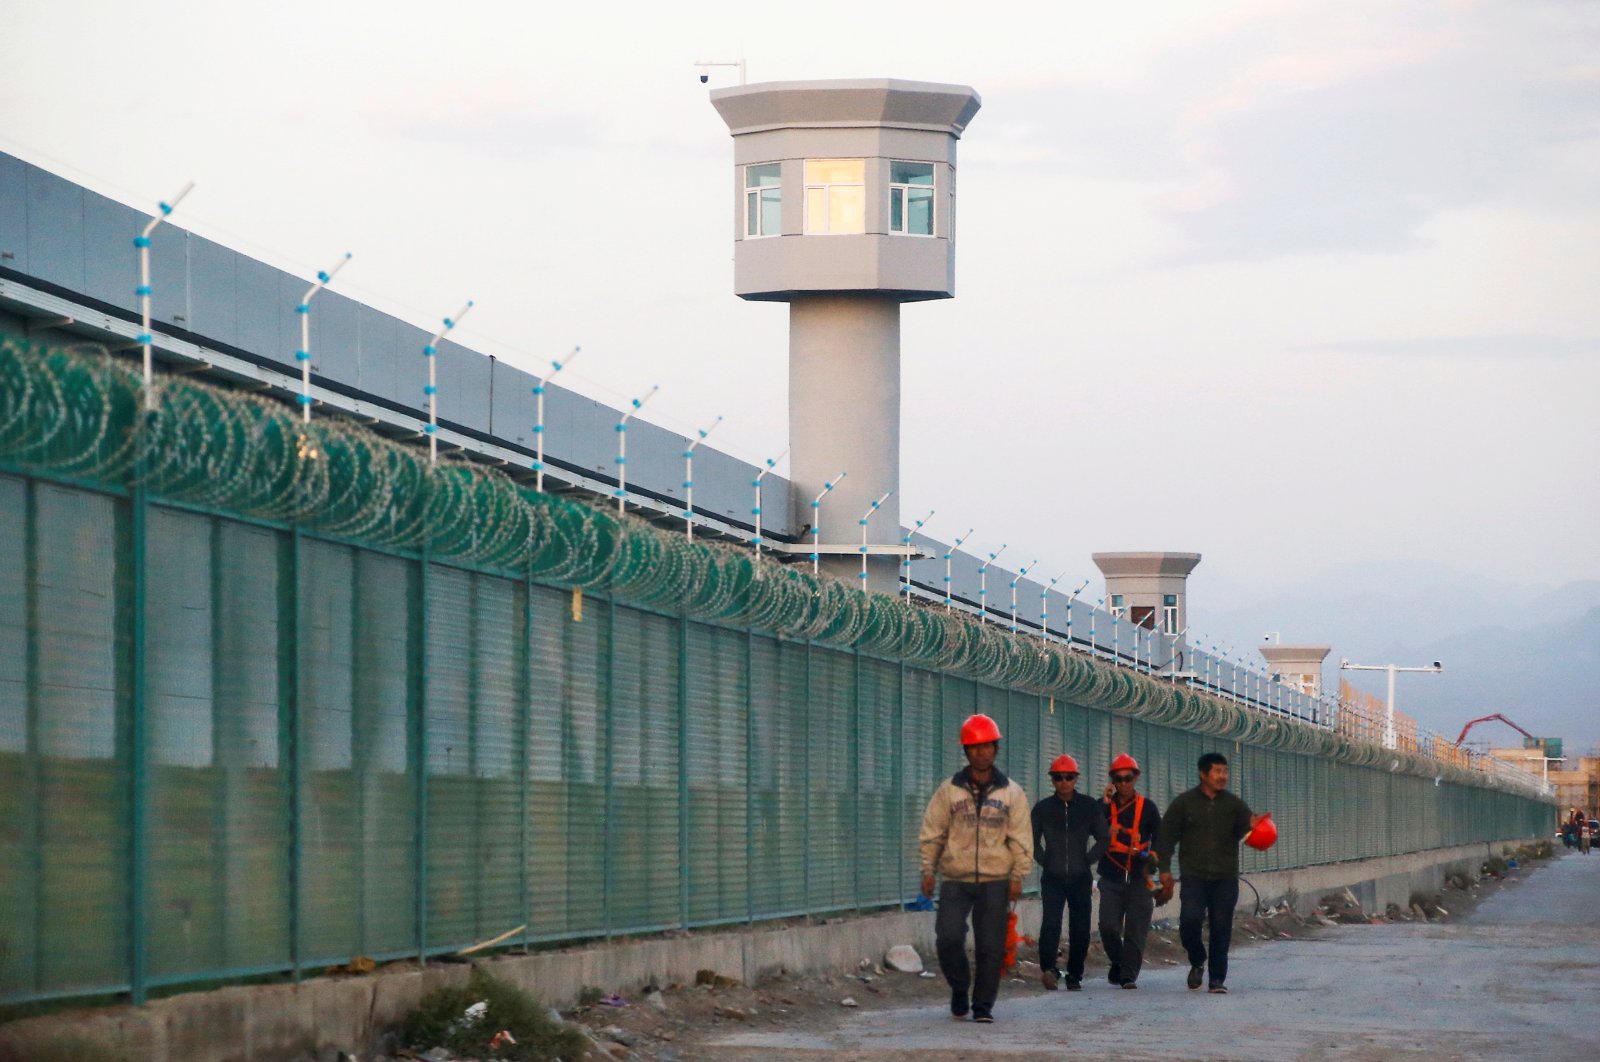 Workers walk by the perimeter fence of what is officially known as a vocational skills education center in Dabancheng, Xinjiang Uighur Autonomous Region, China, Sept. 4, 2018. (Reuters Photo)